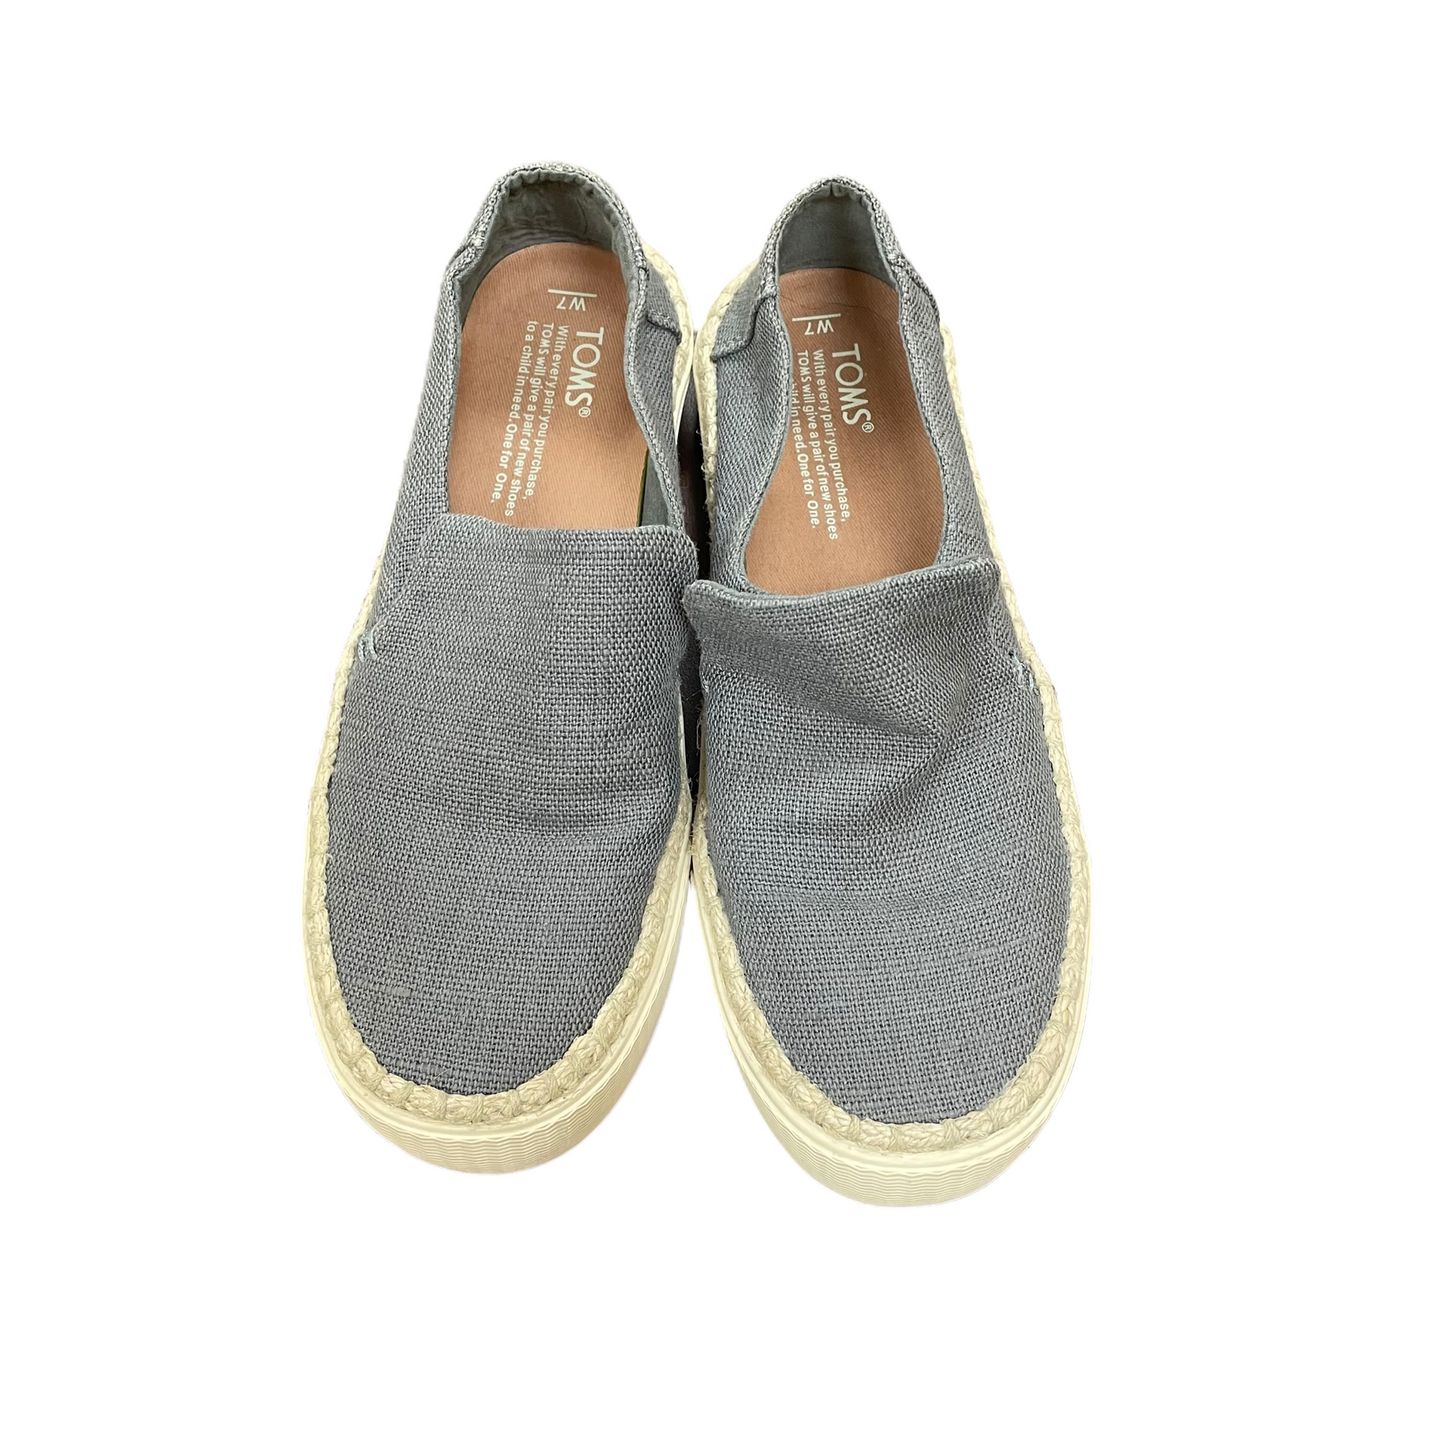 Grey Shoes Flats By Toms, Size: 7